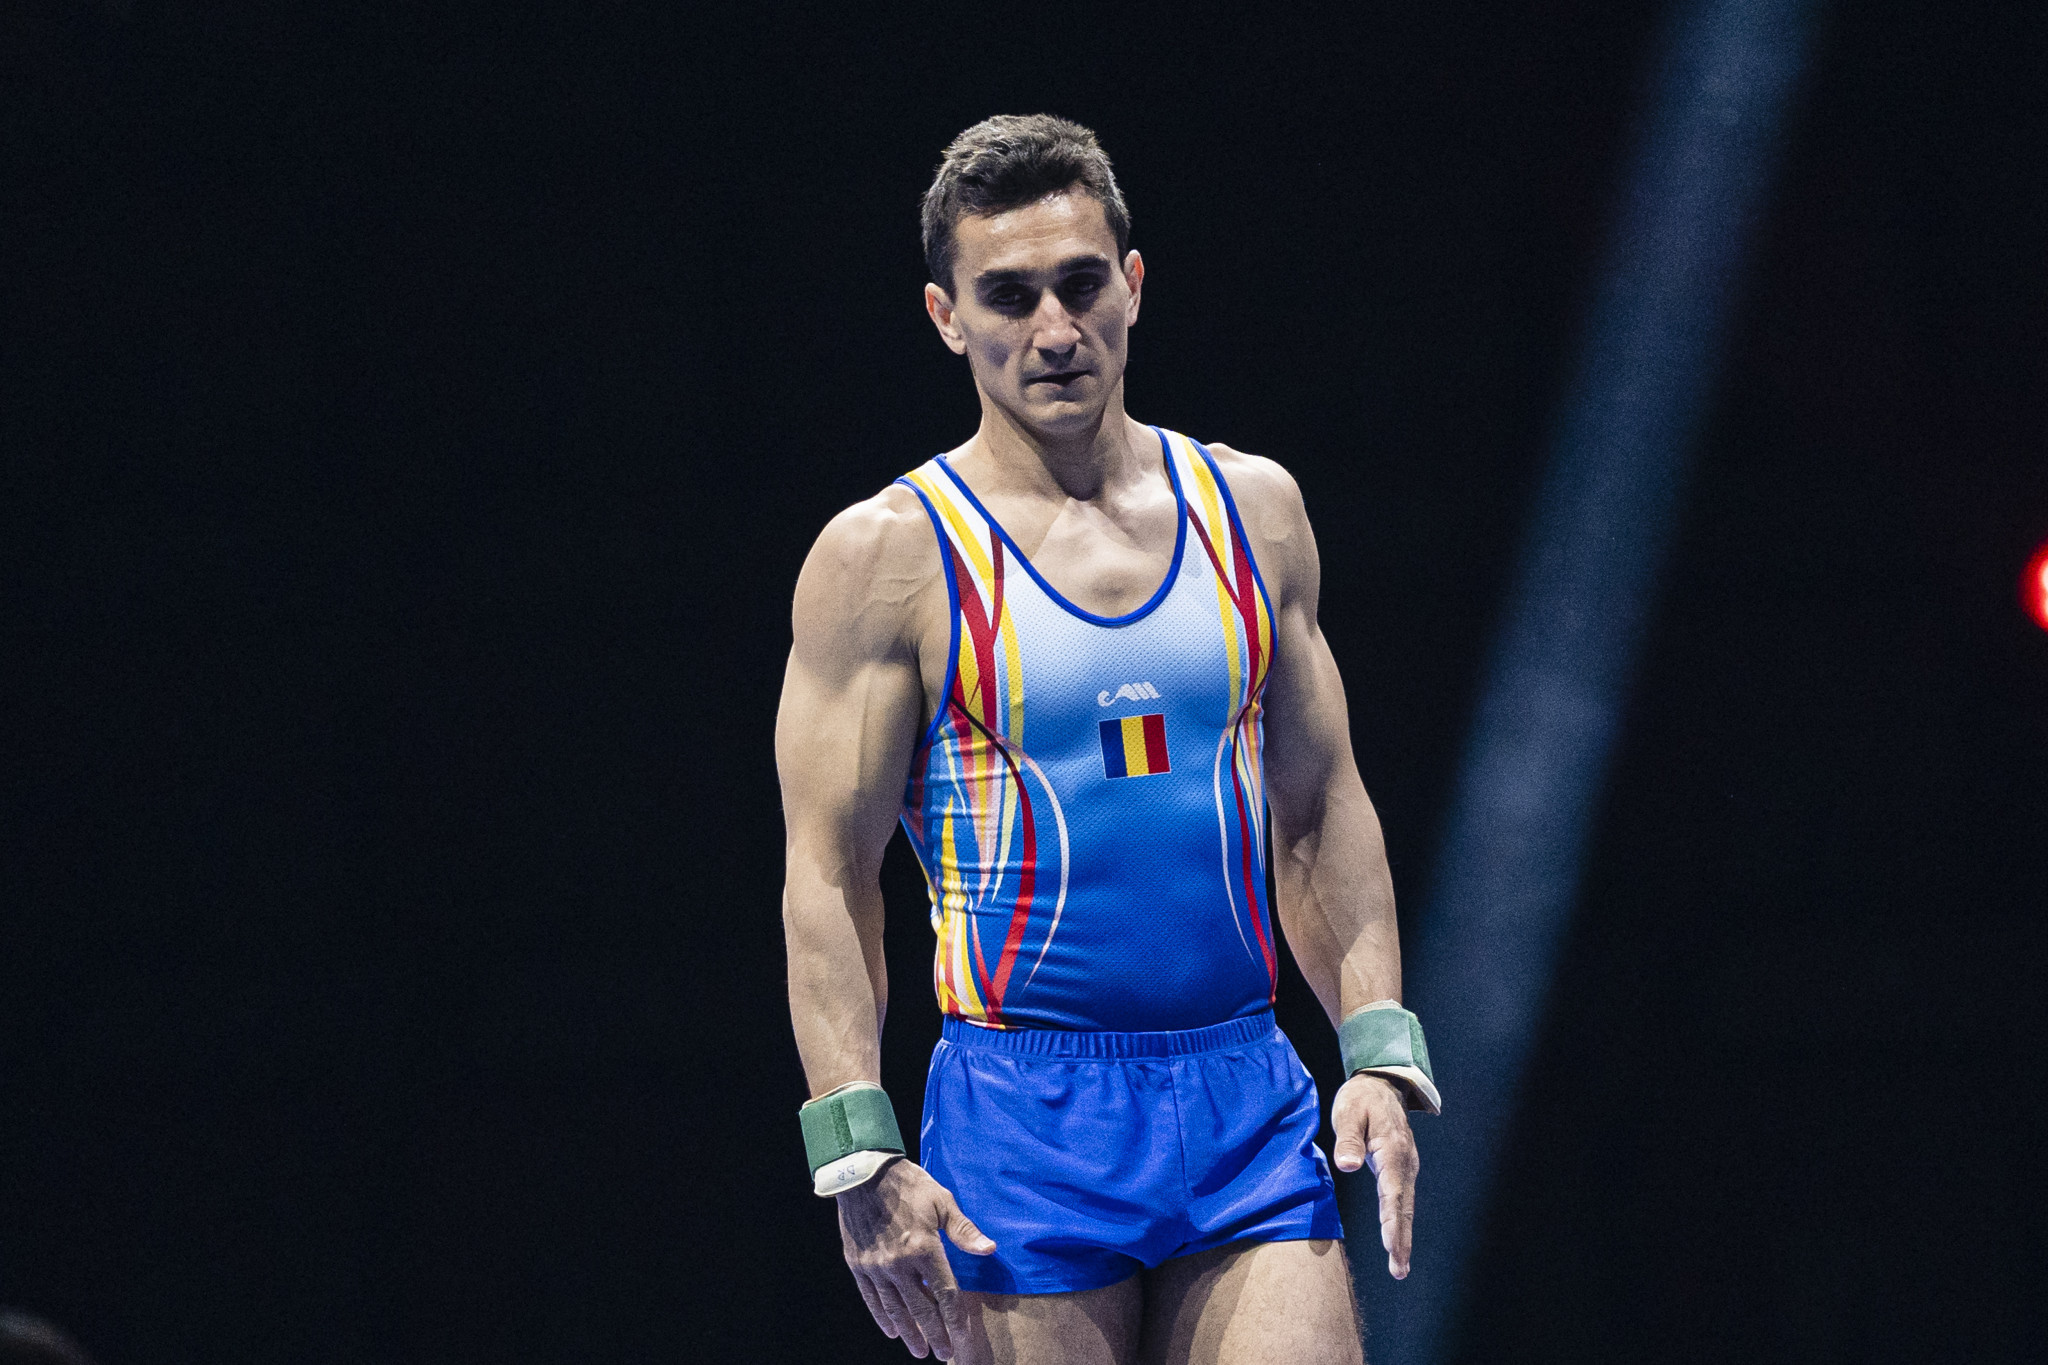 Romania's eight-time artistic gymnastics world champion Marian Drăgulescu has pledged his support for the campaign ©Getty Images